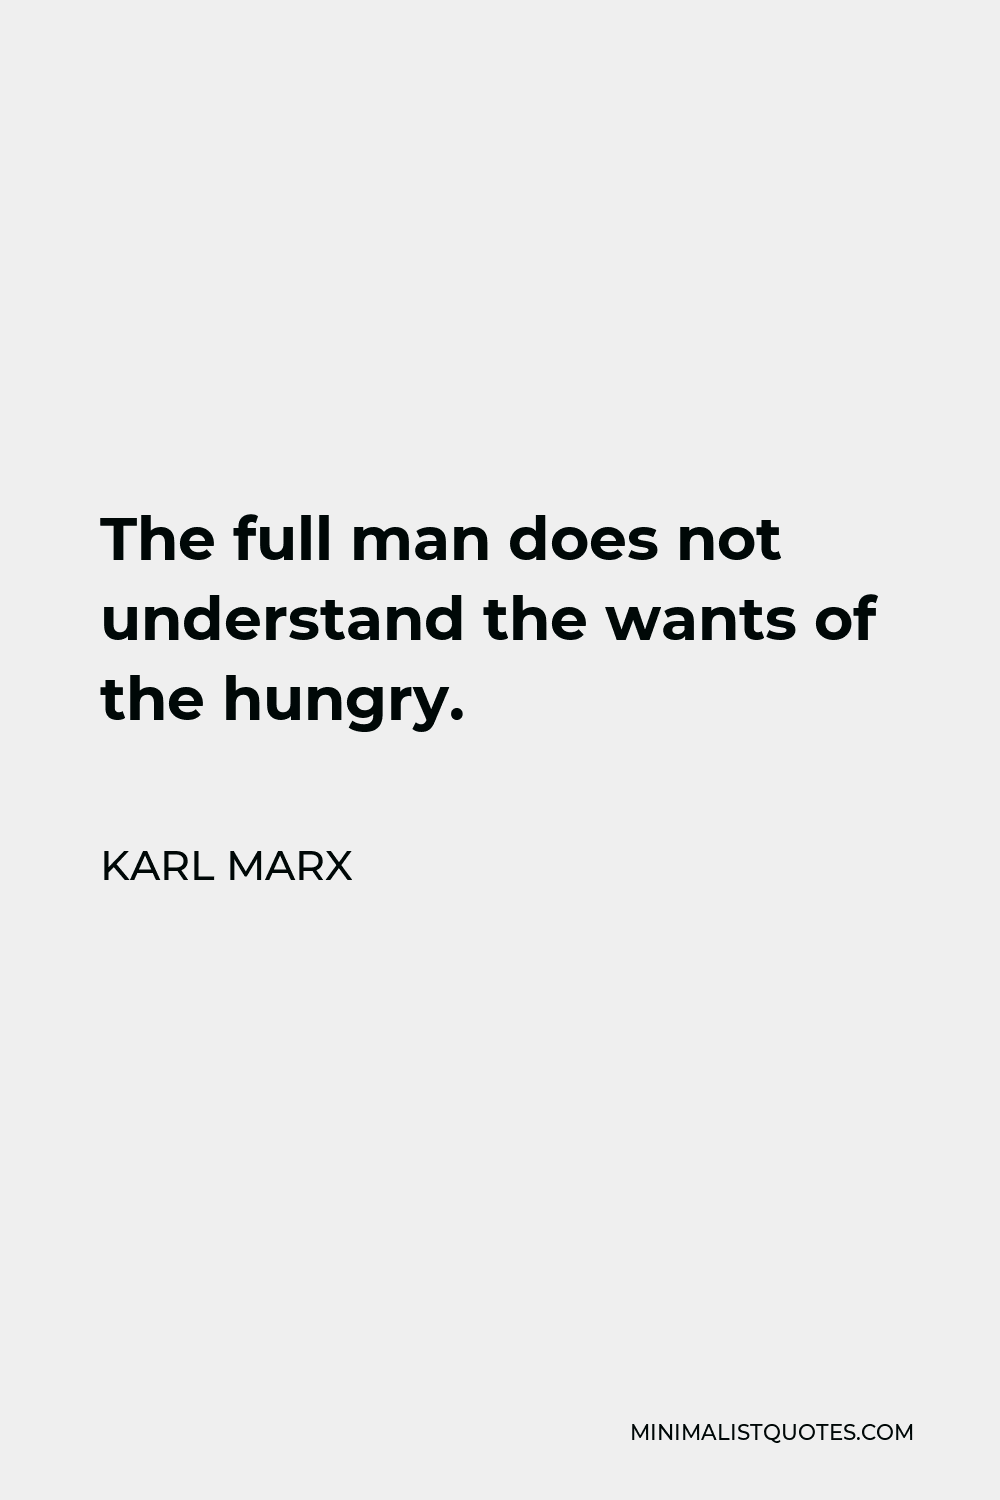 Karl Marx Quote - The full man does not understand the wants of the hungry.